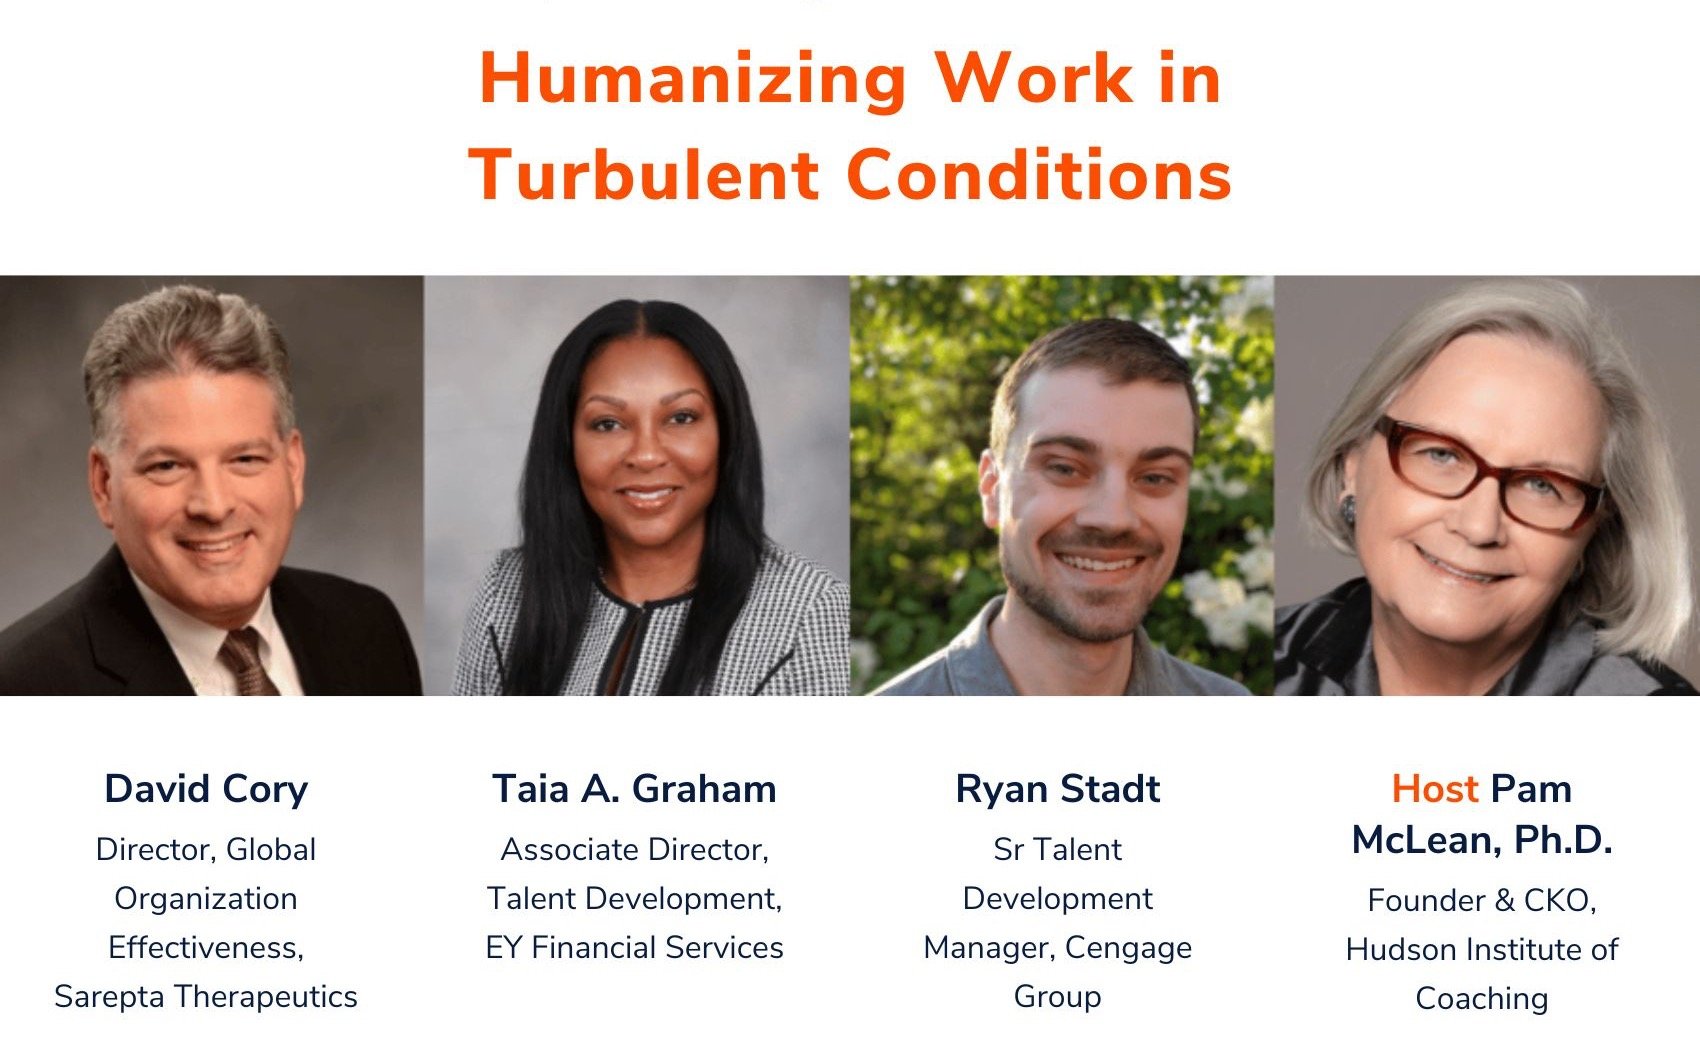 [Video] Hudson Coaching Conversations: Humanizing Work in Turbulent Conditions